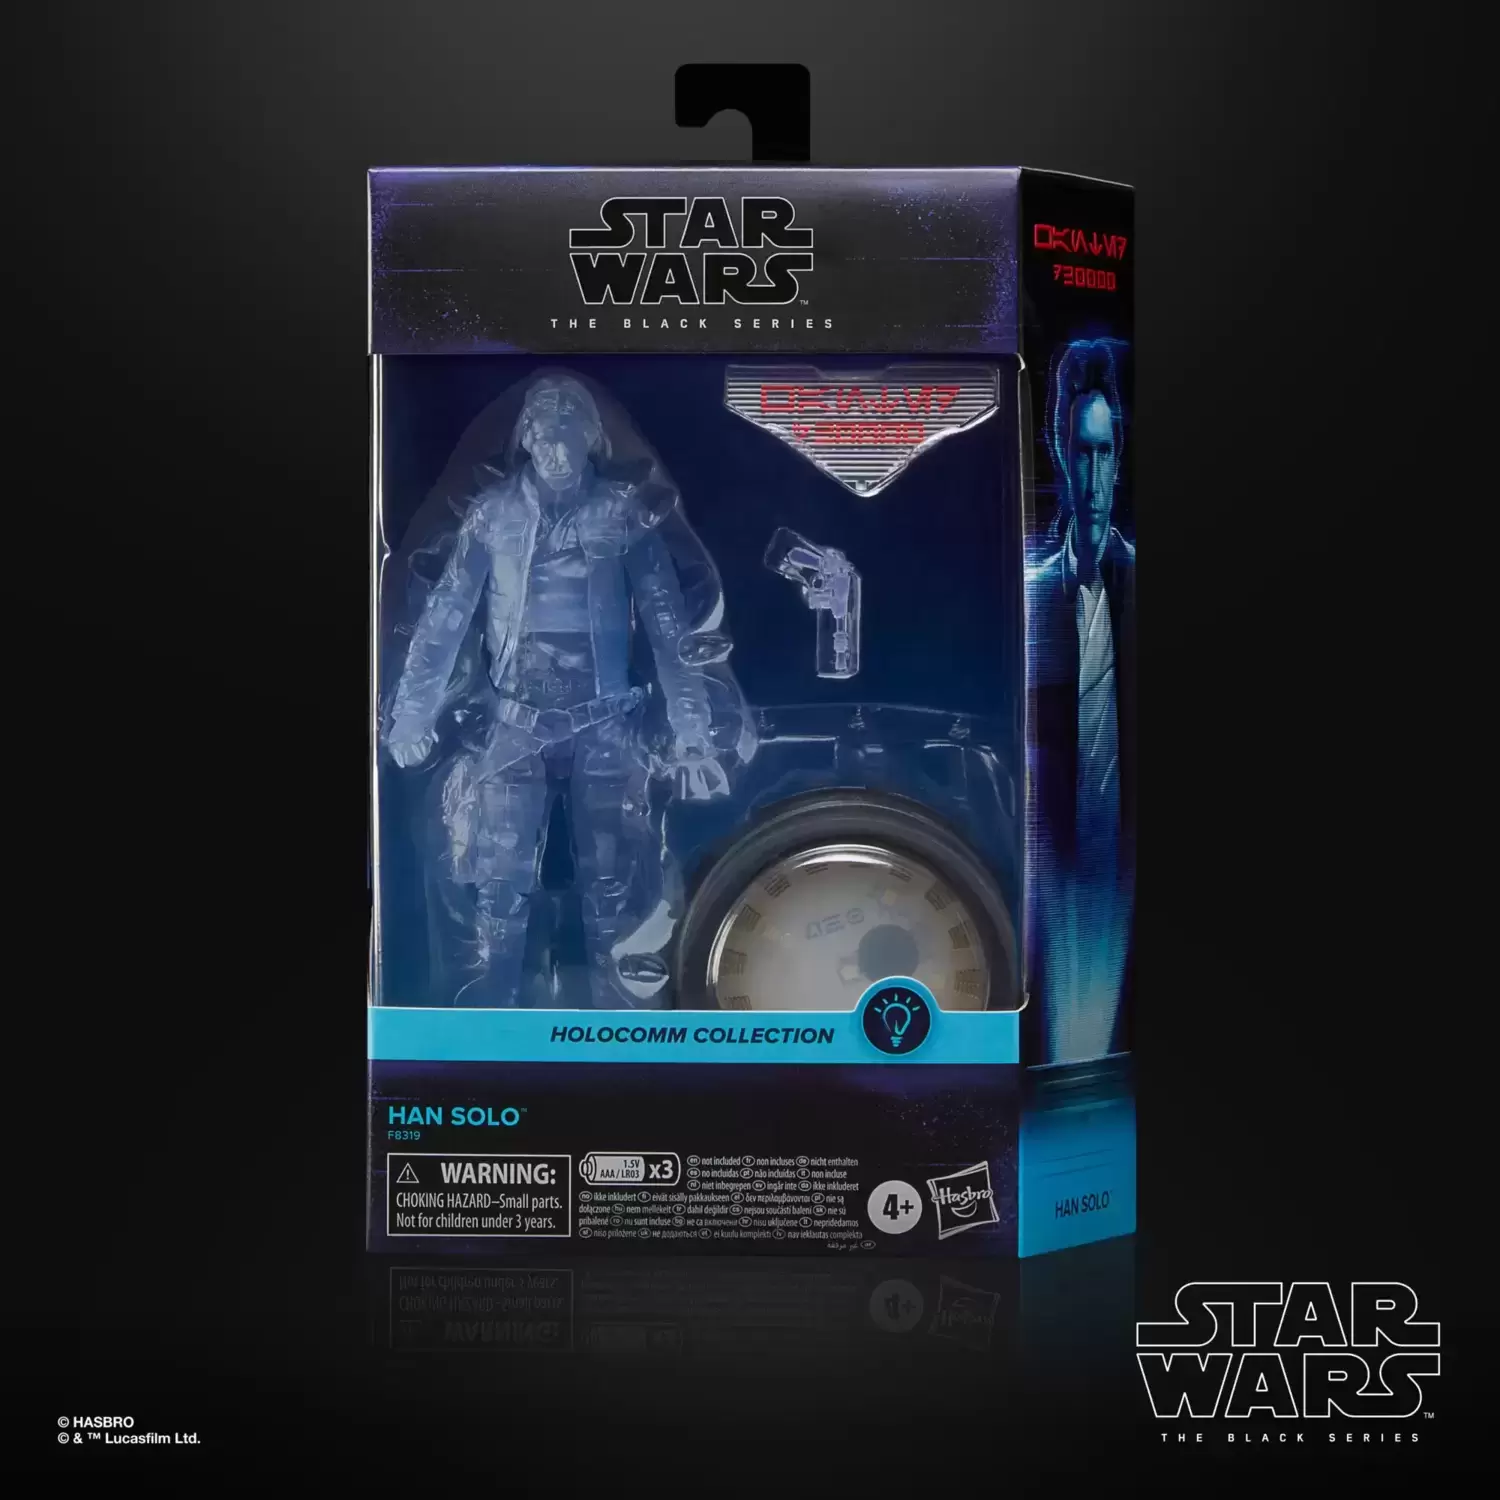 The Black Series - Phase 4 - Han Solo  - Holocomm Collection